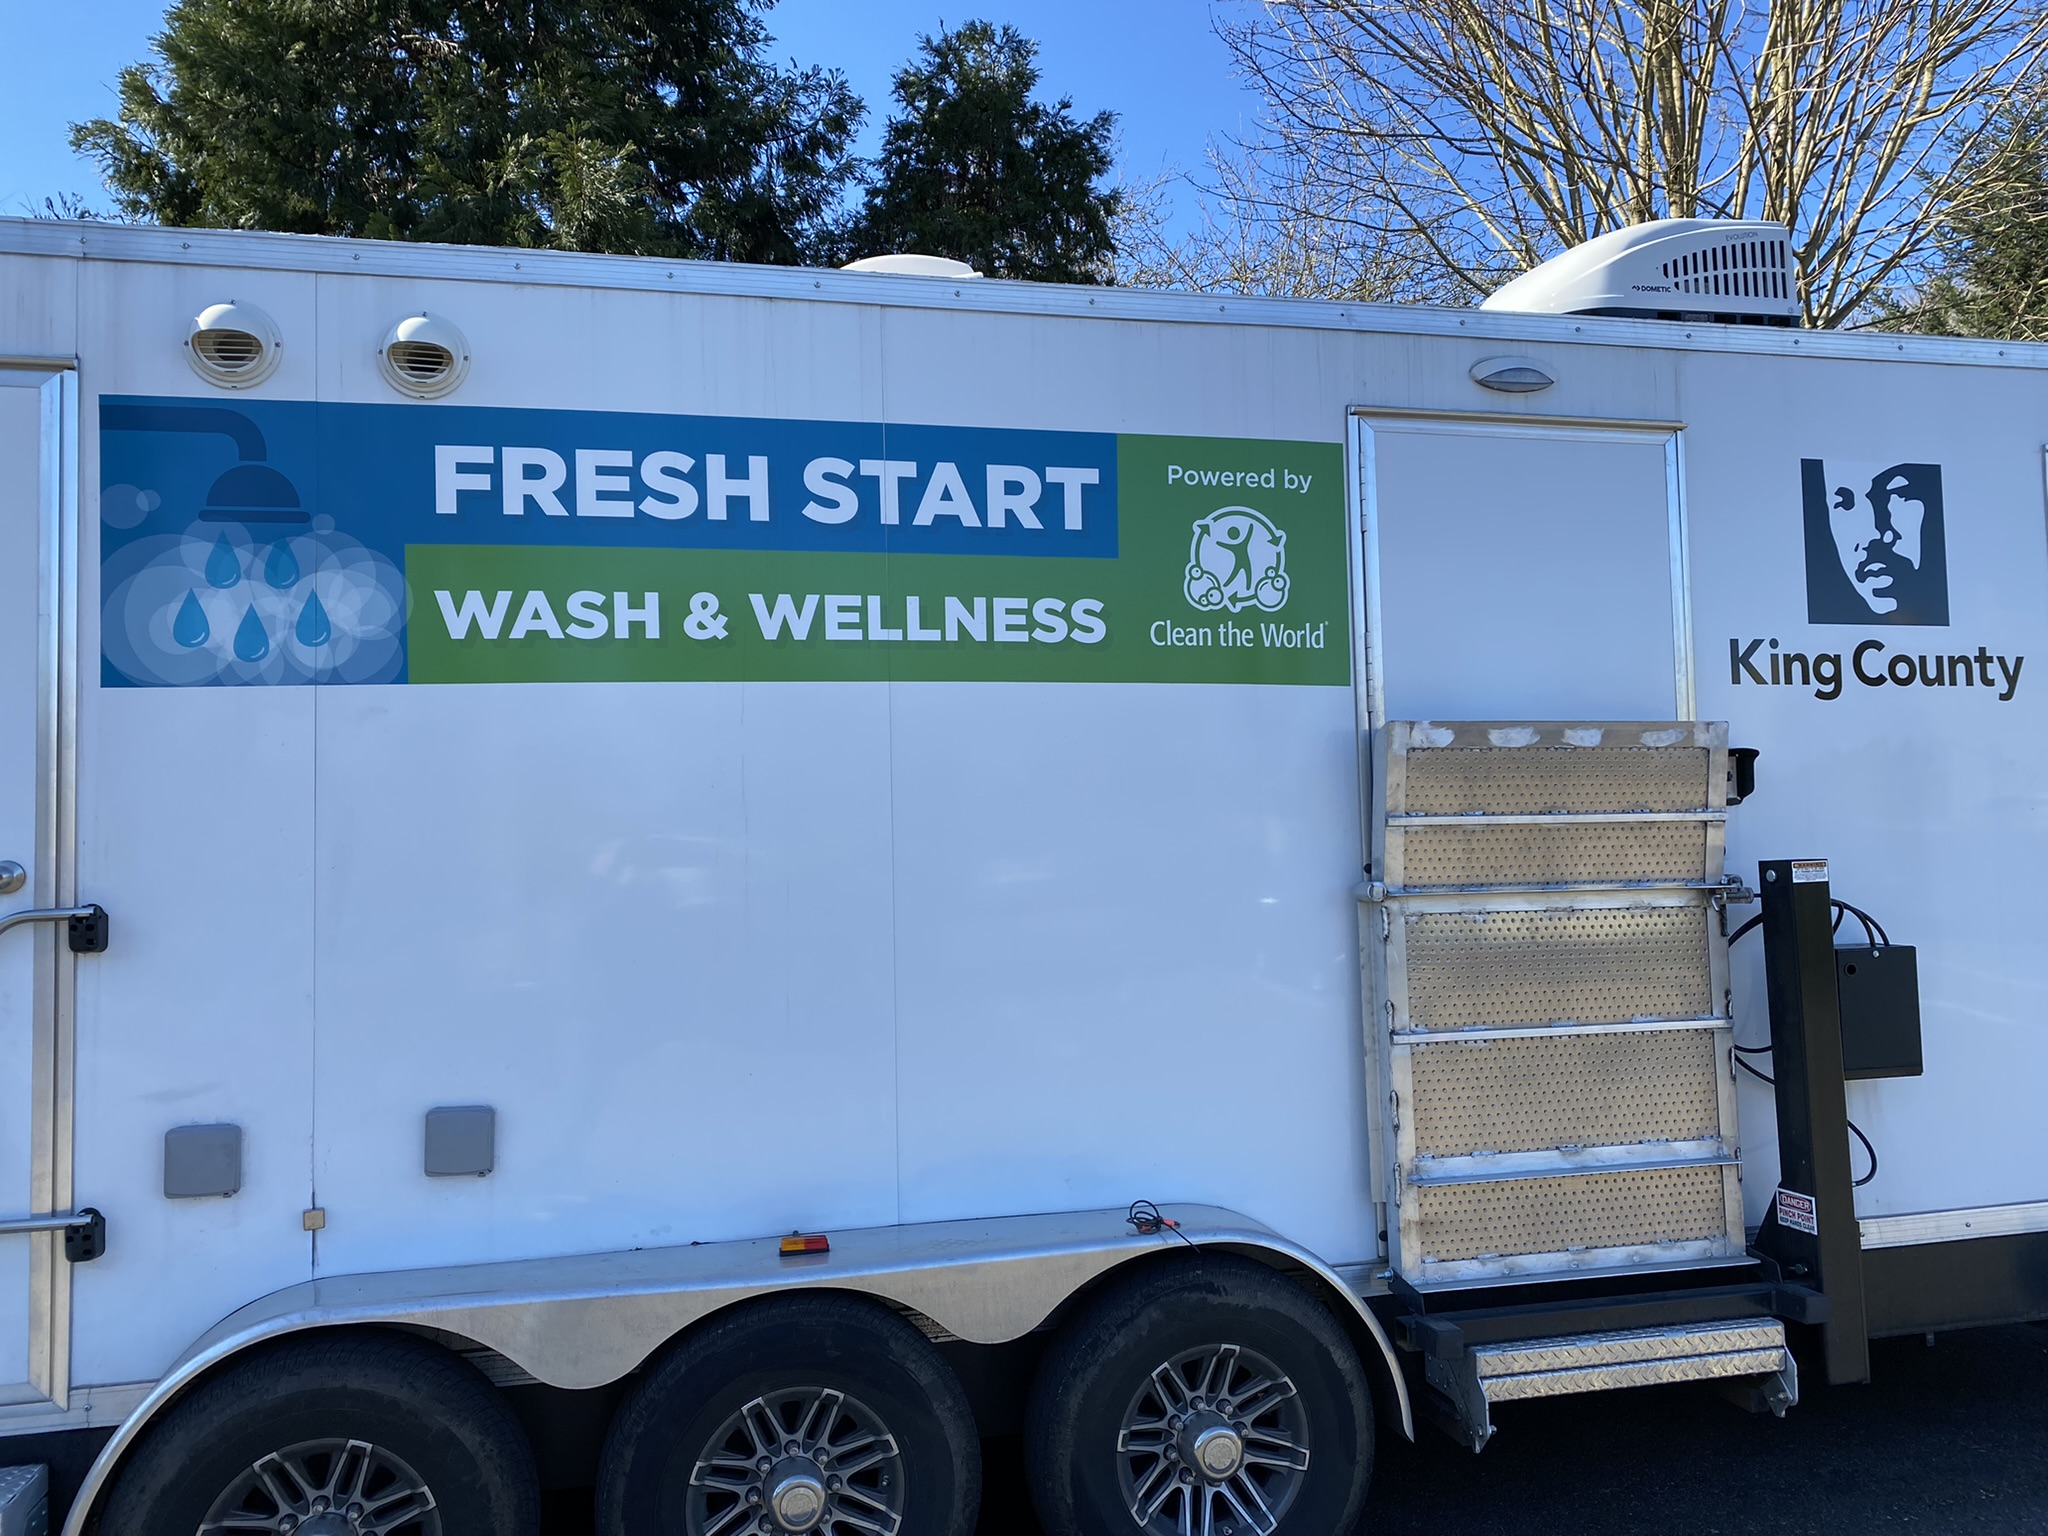 King County is deploying a mobile shower trailer across the region.